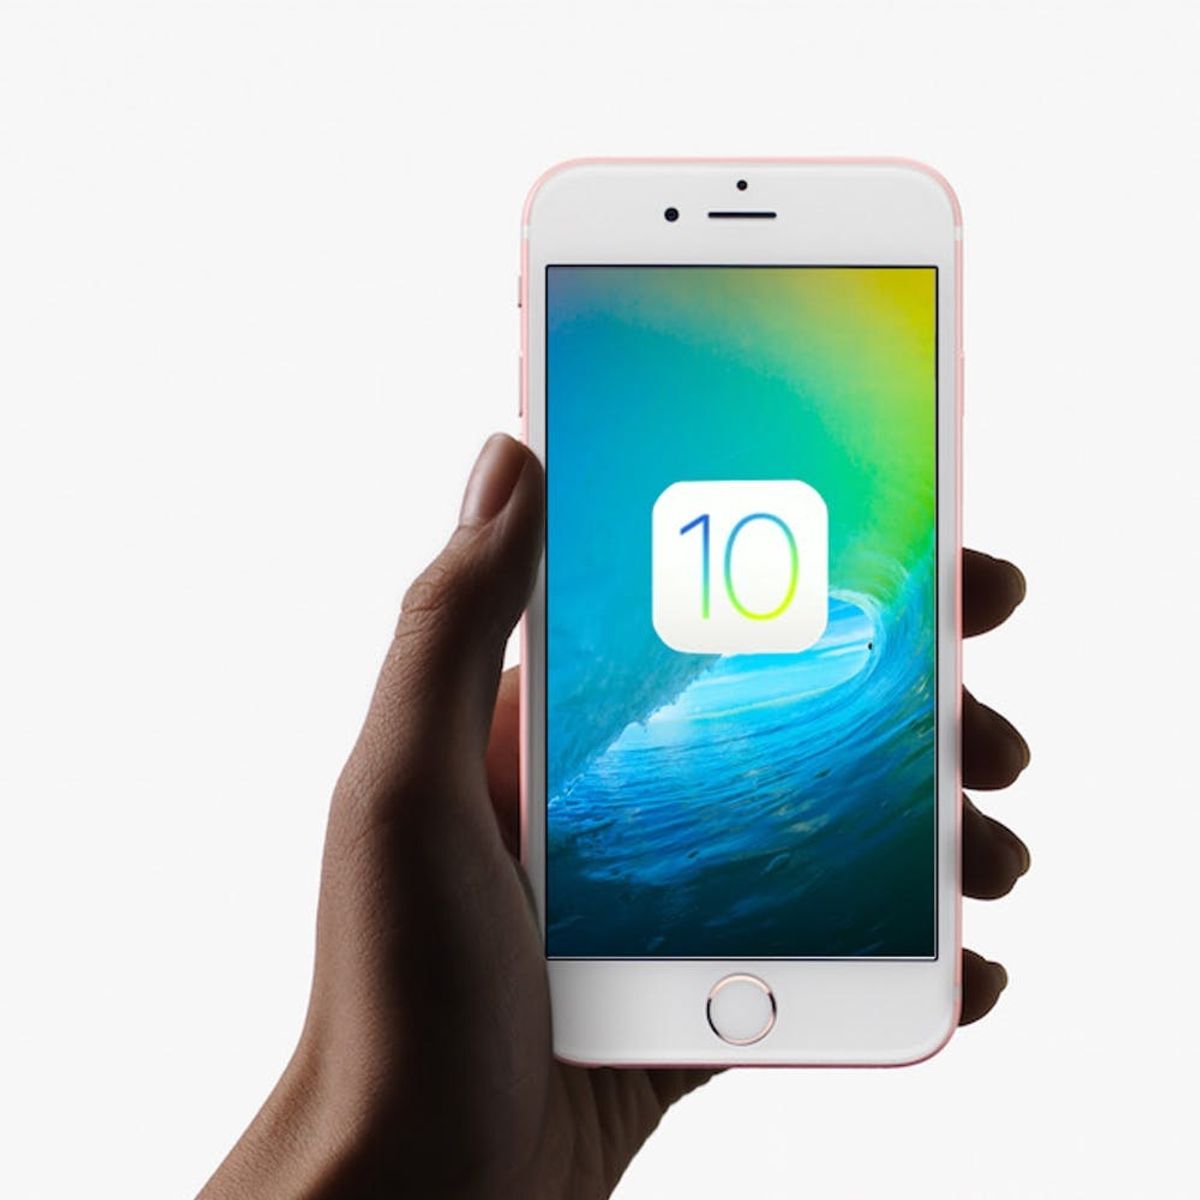 The Good, Bad + Ugly Twitter Reactions of the iOS 10 Launch